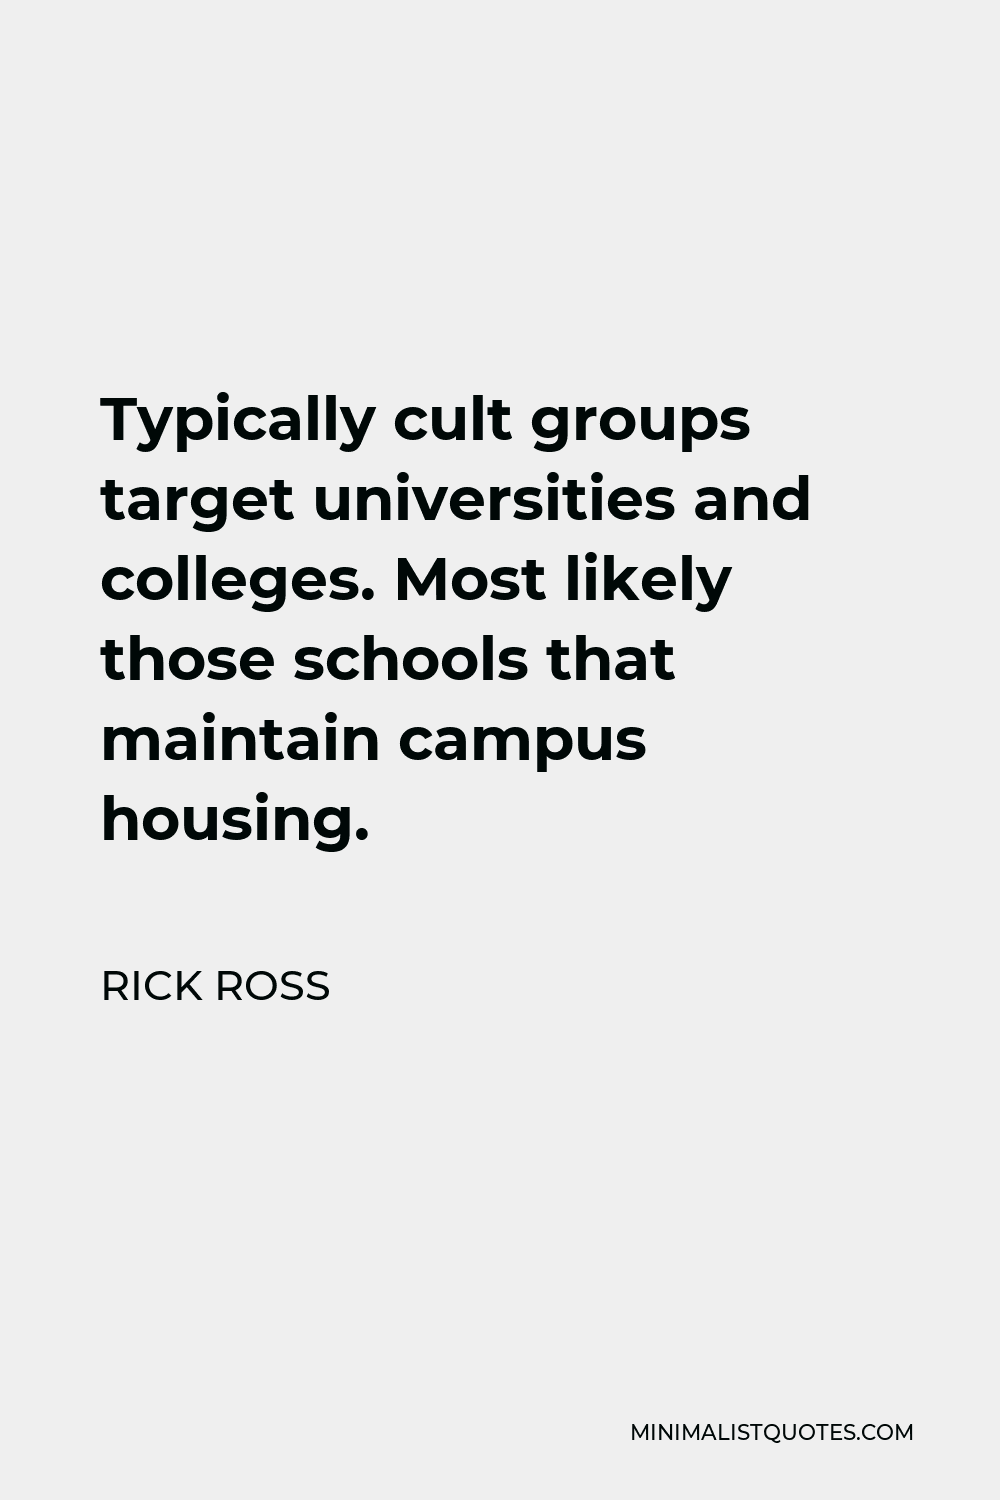 Rick Ross Quote - Typically cult groups target universities and colleges. Most likely those schools that maintain campus housing.